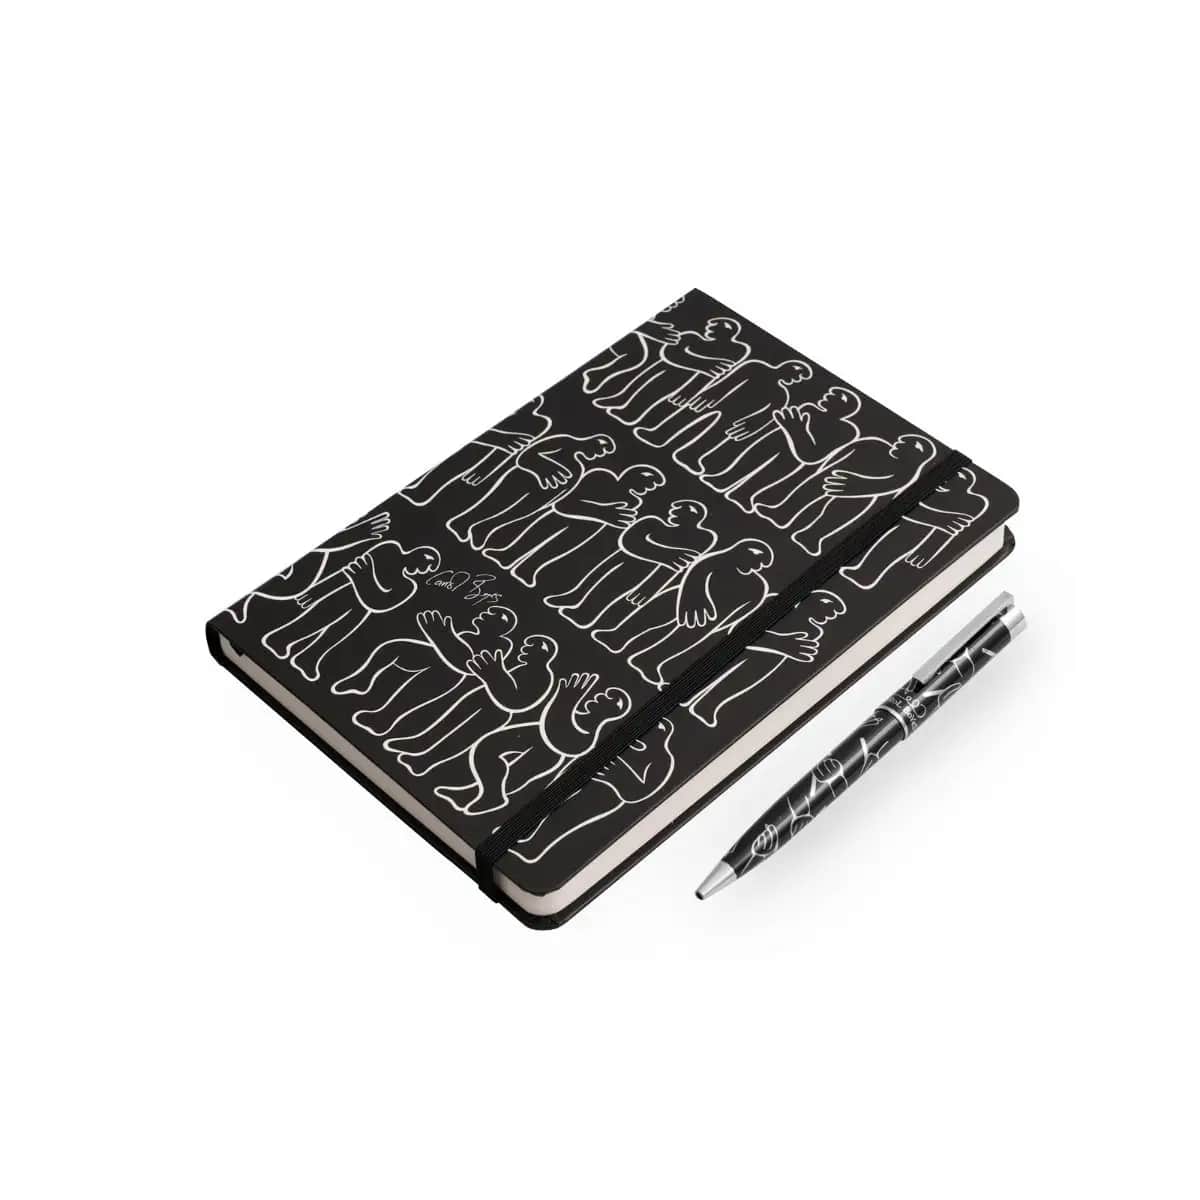 Carrol Boyes Notebook Set Discussion